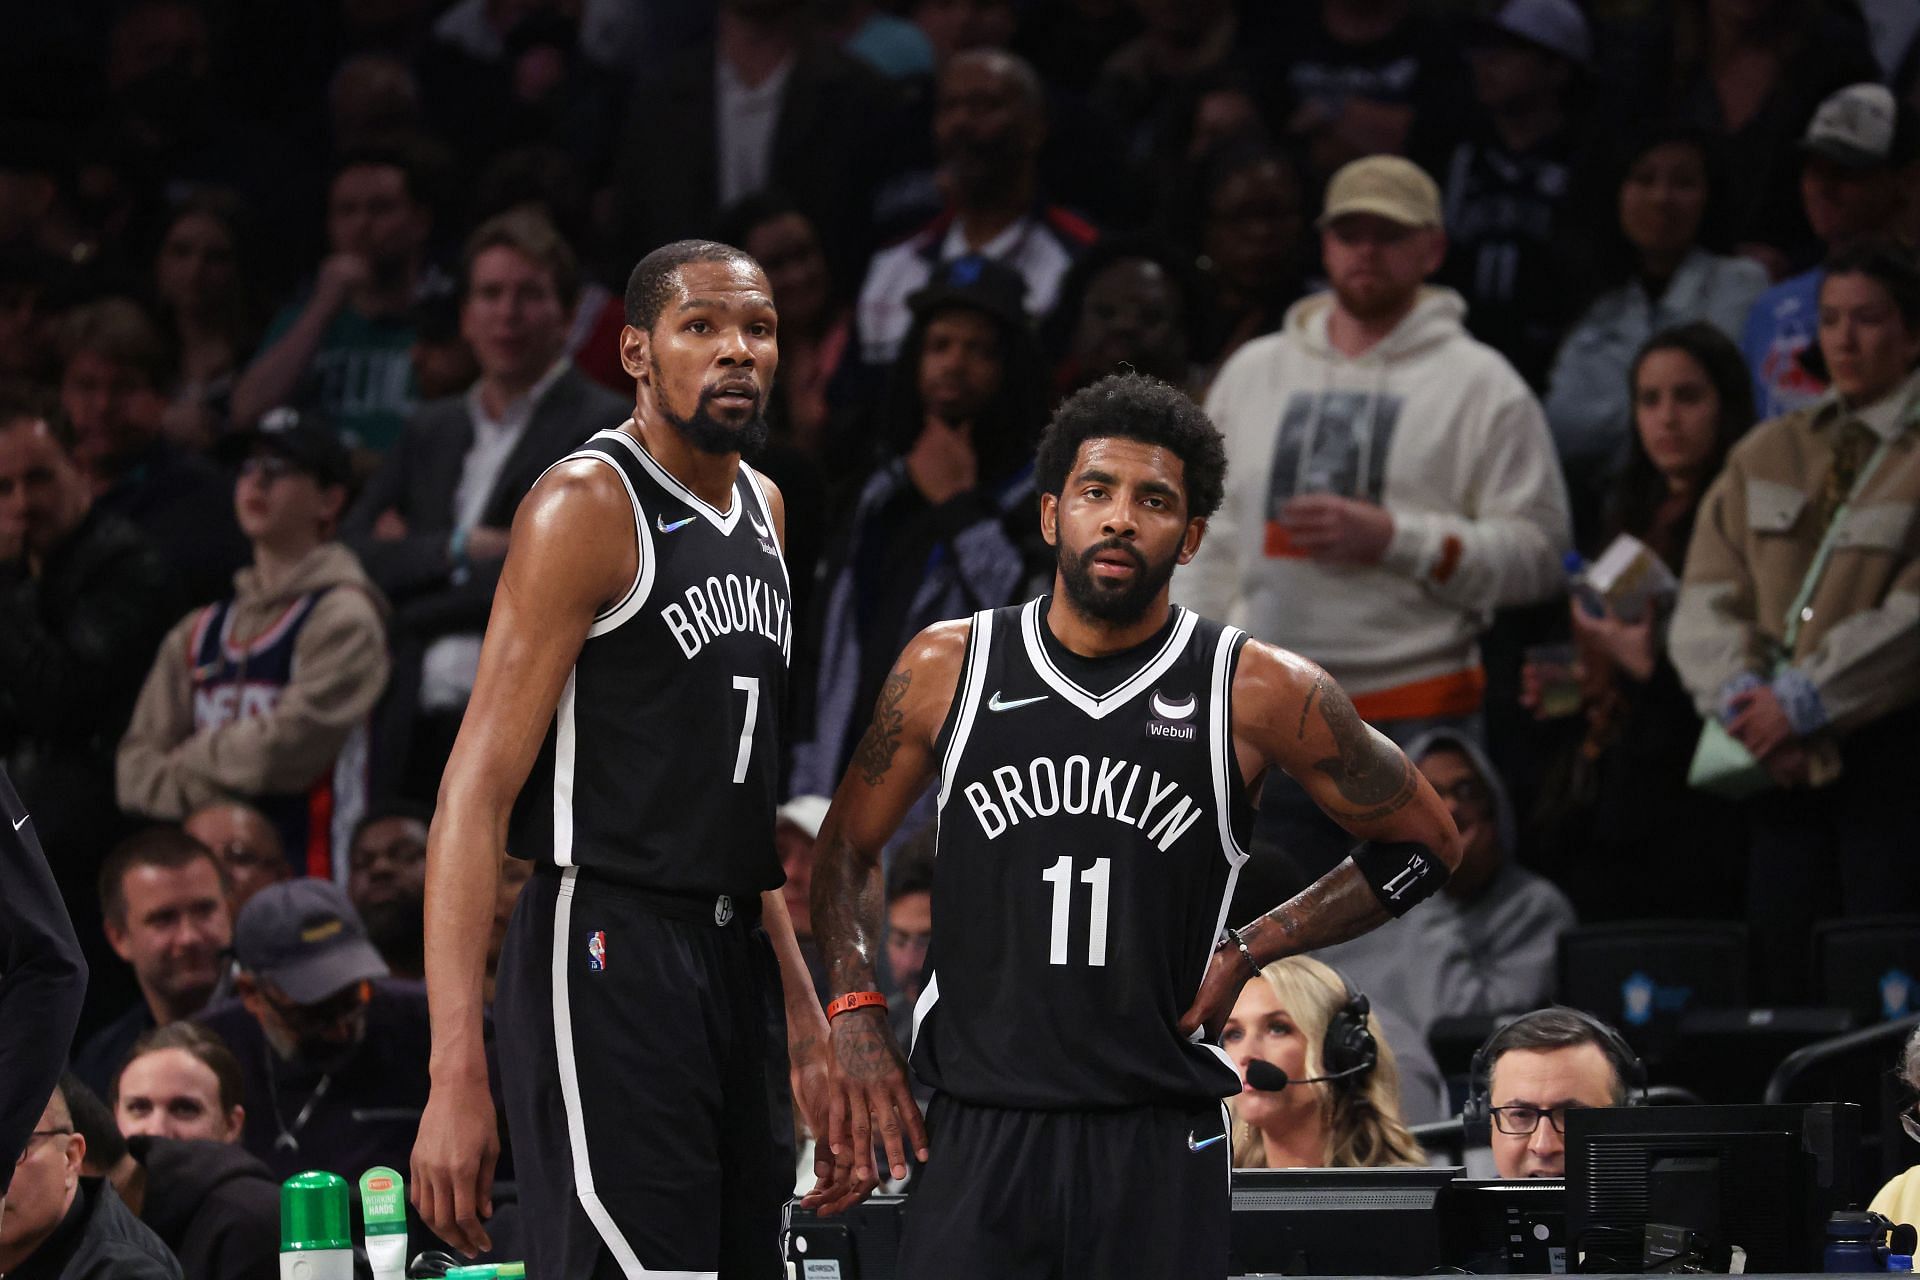 Kevin Durant and Kyrie Irving can create their own &quot;Last Dance&quot; story if they remain with the Brooklyn Nets.